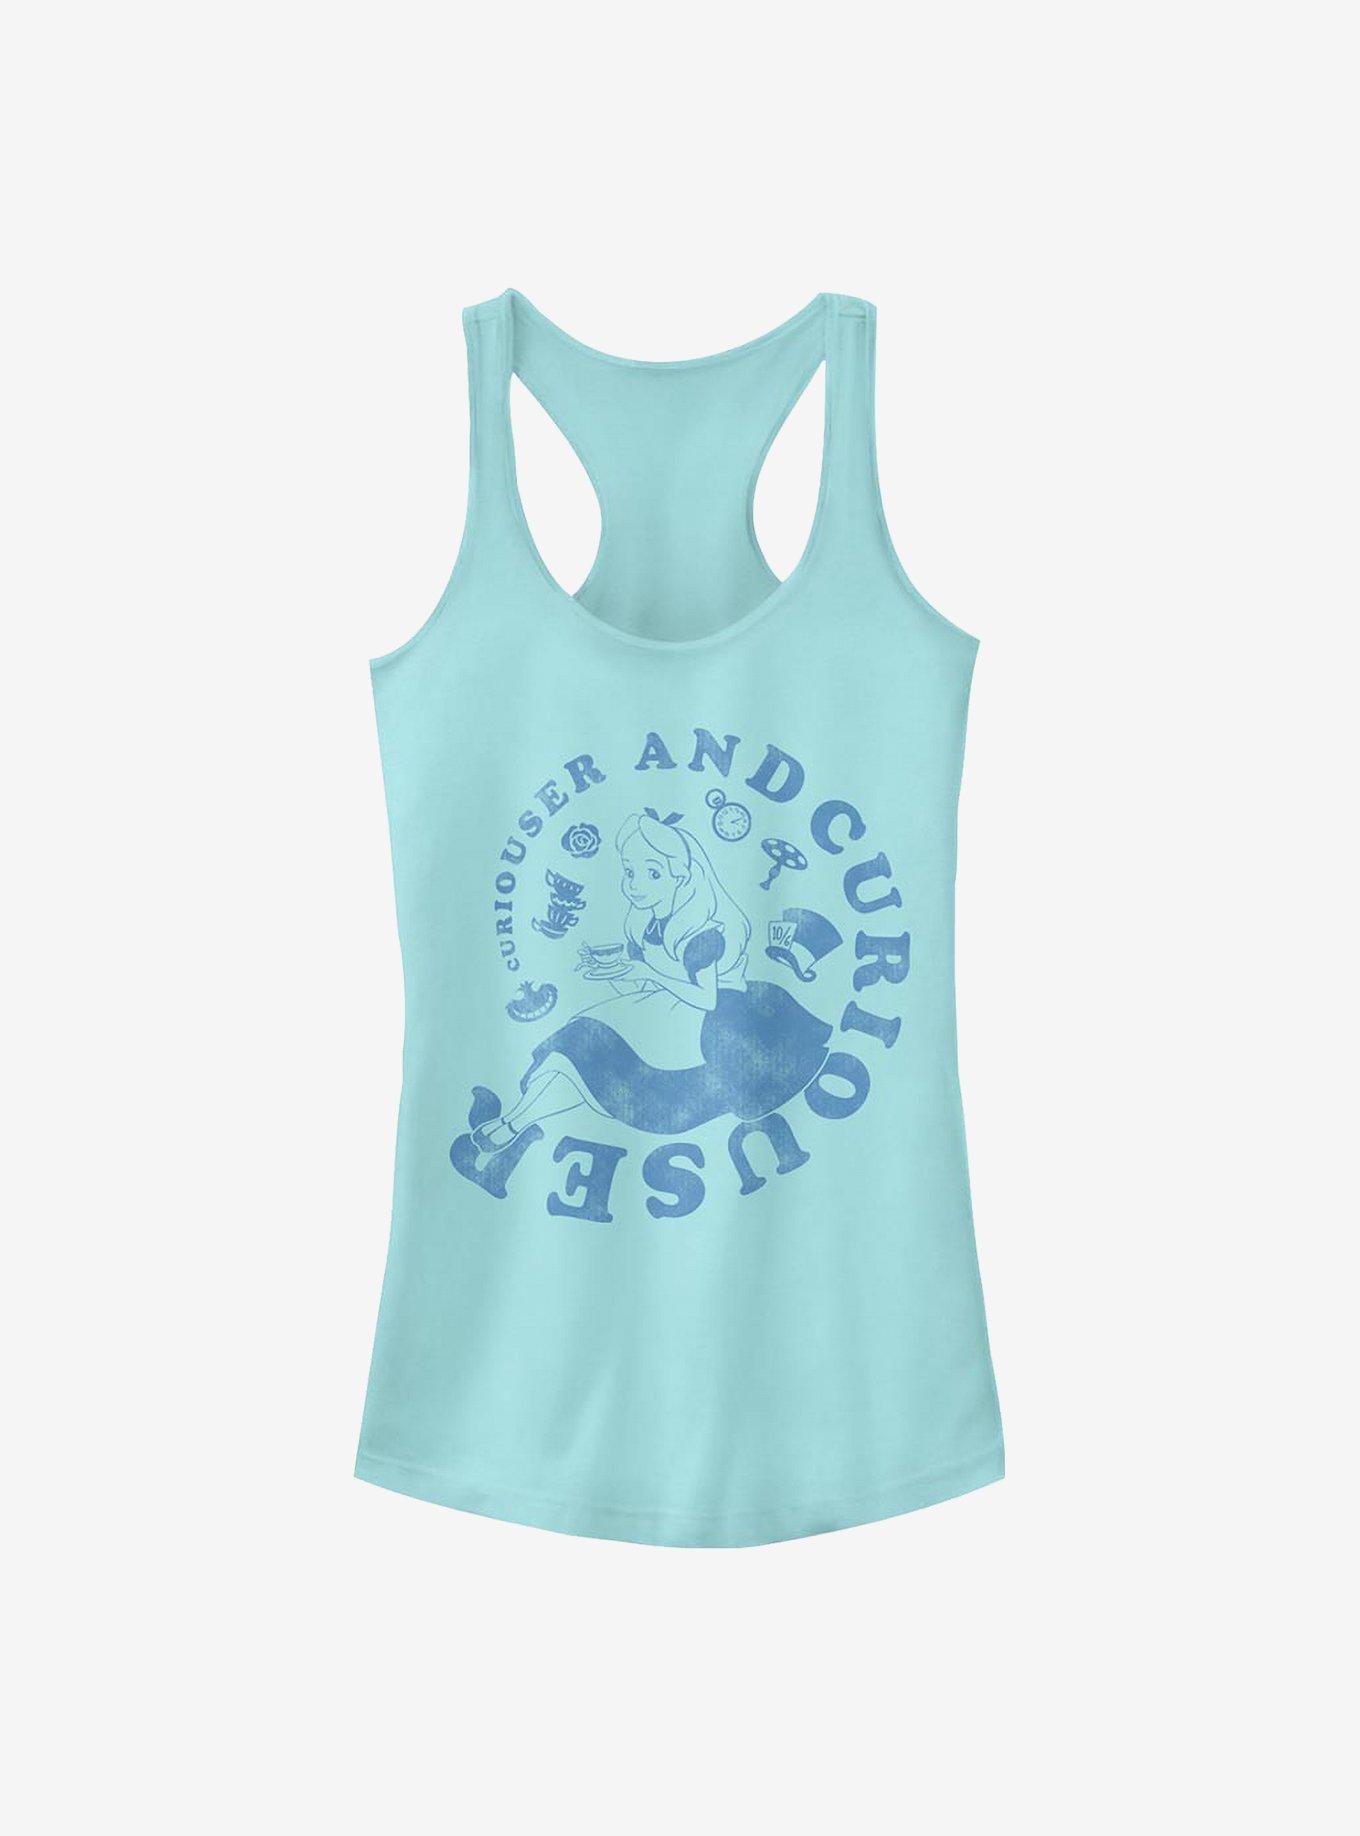 Disney Alice In Wonderland Alice Curiouser And Curiouser Girls Tank